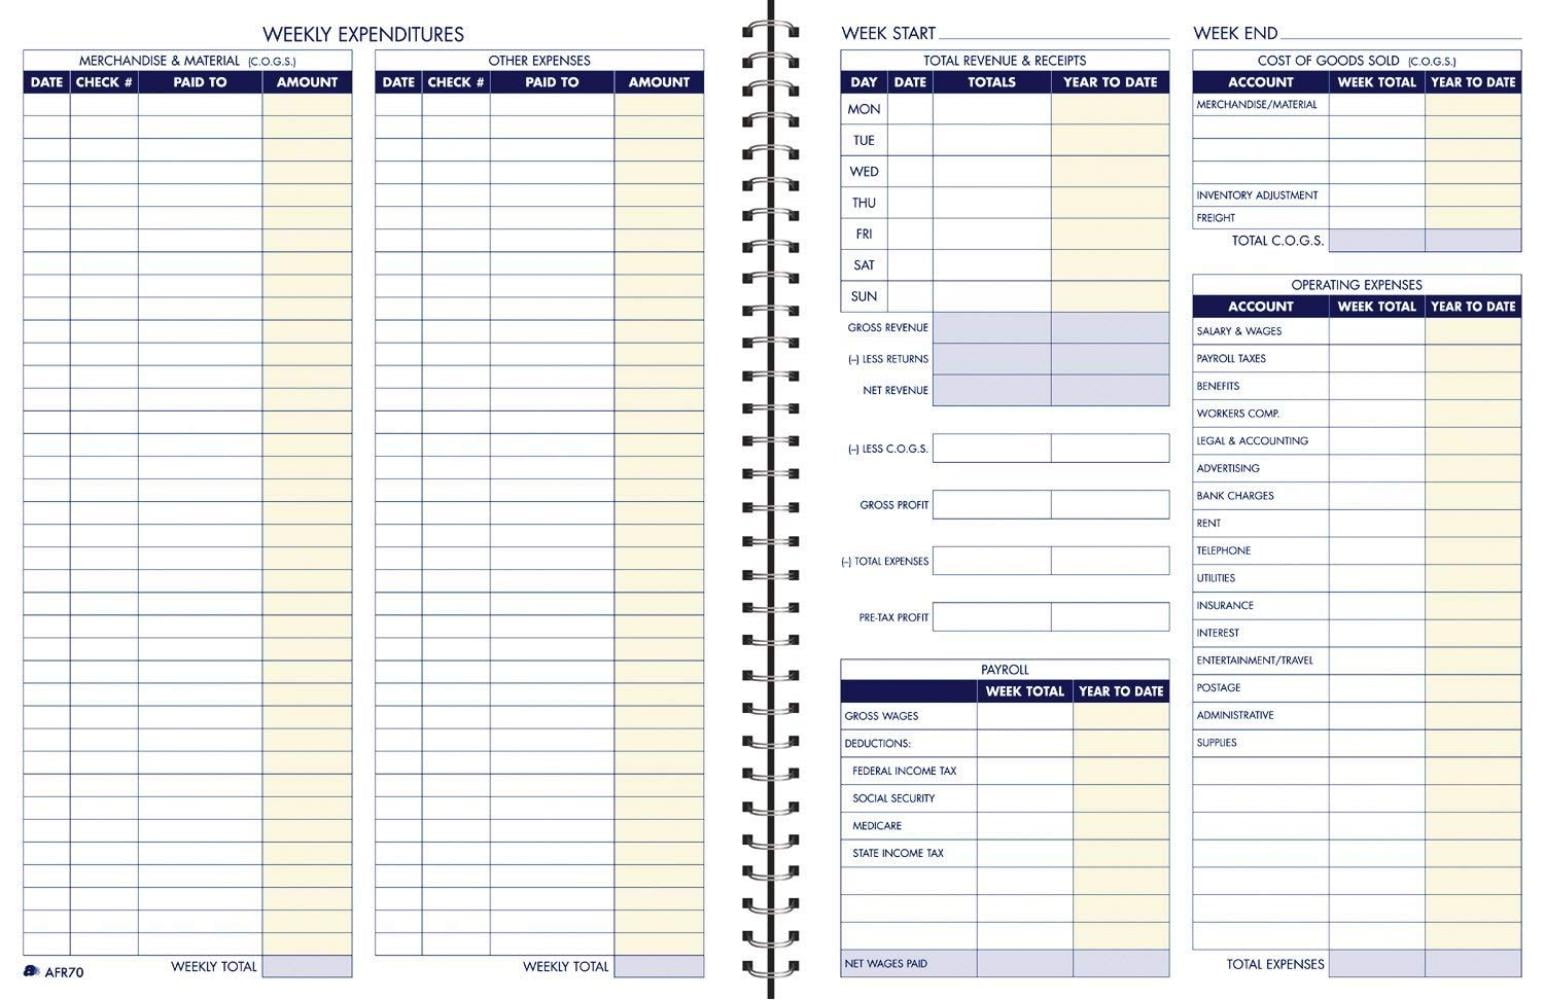 Bookkeeping Record Book, Weekly Format, 8.5 x 11 Inches, White (AFR70